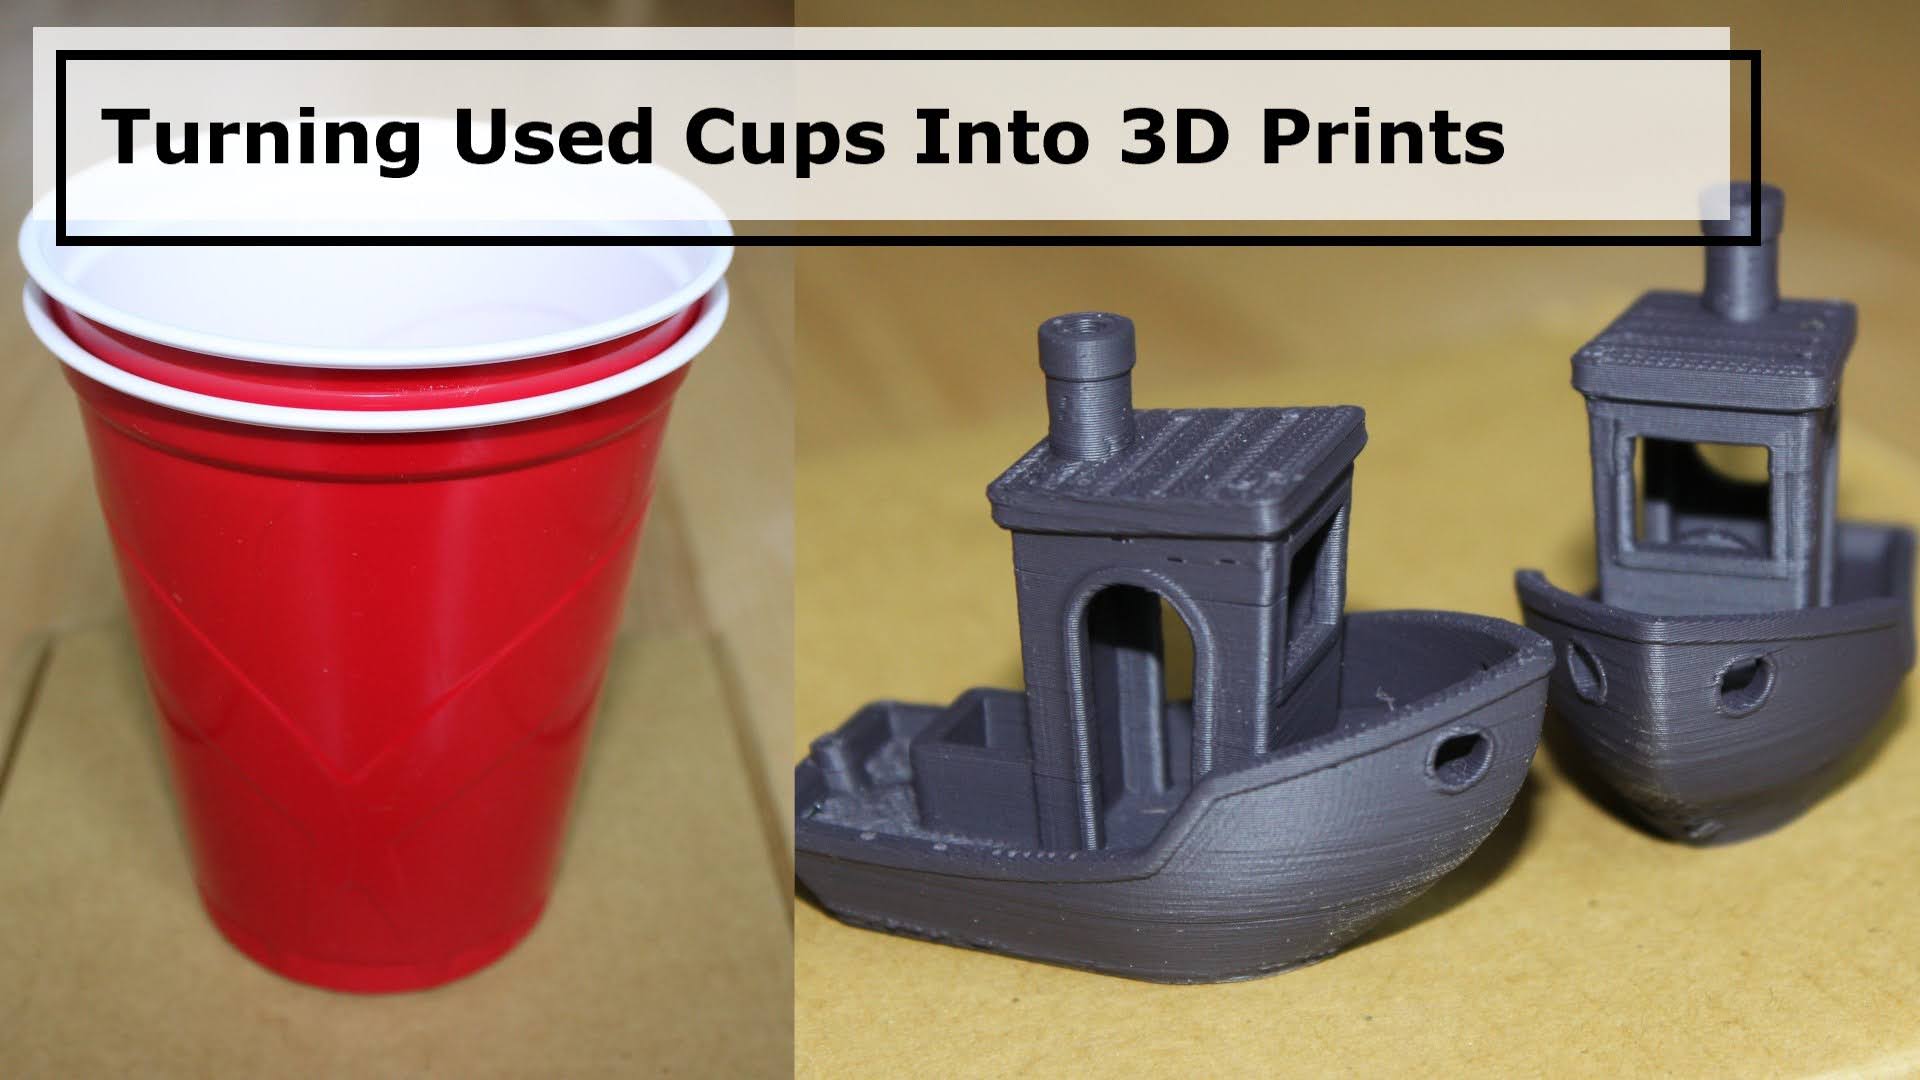 Image of Single Use Cups and 3D Printed Benchies Made From Them